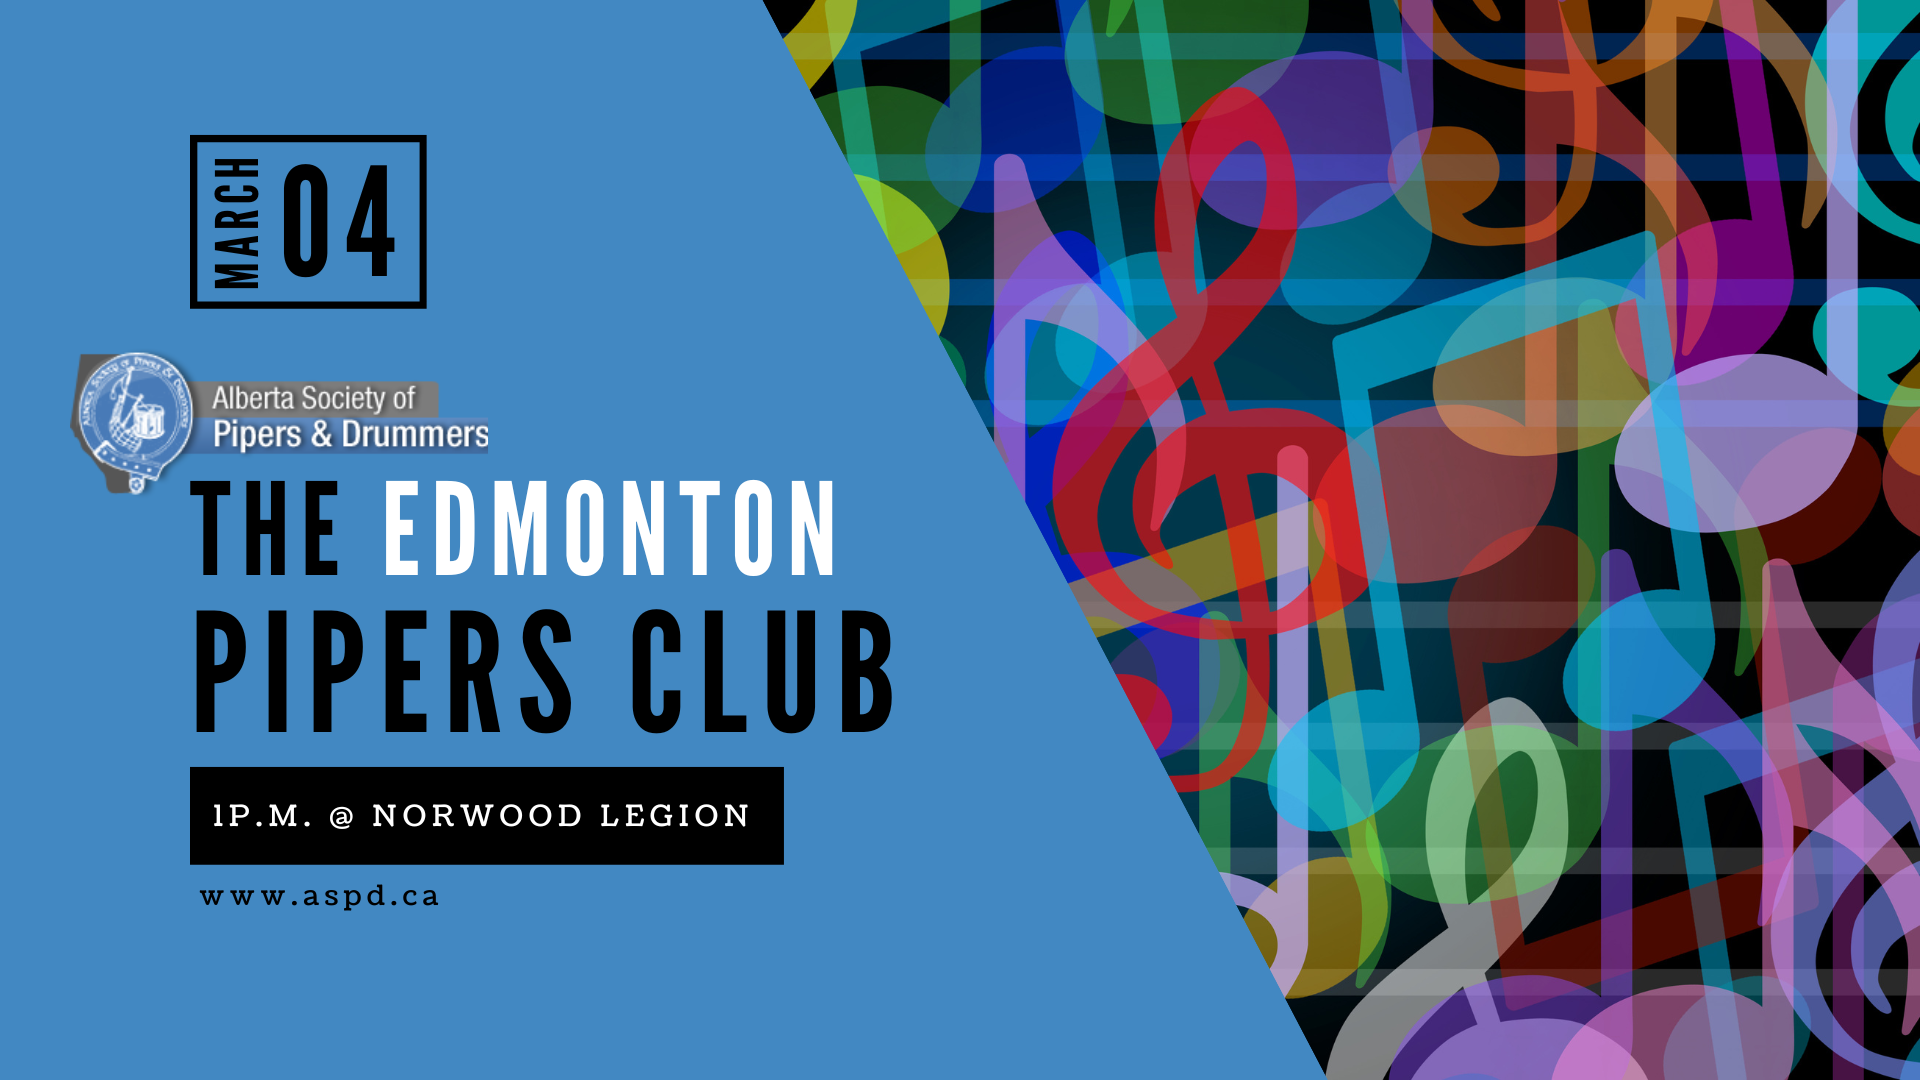 Edmonton Pipers Club hosted by the ASPD